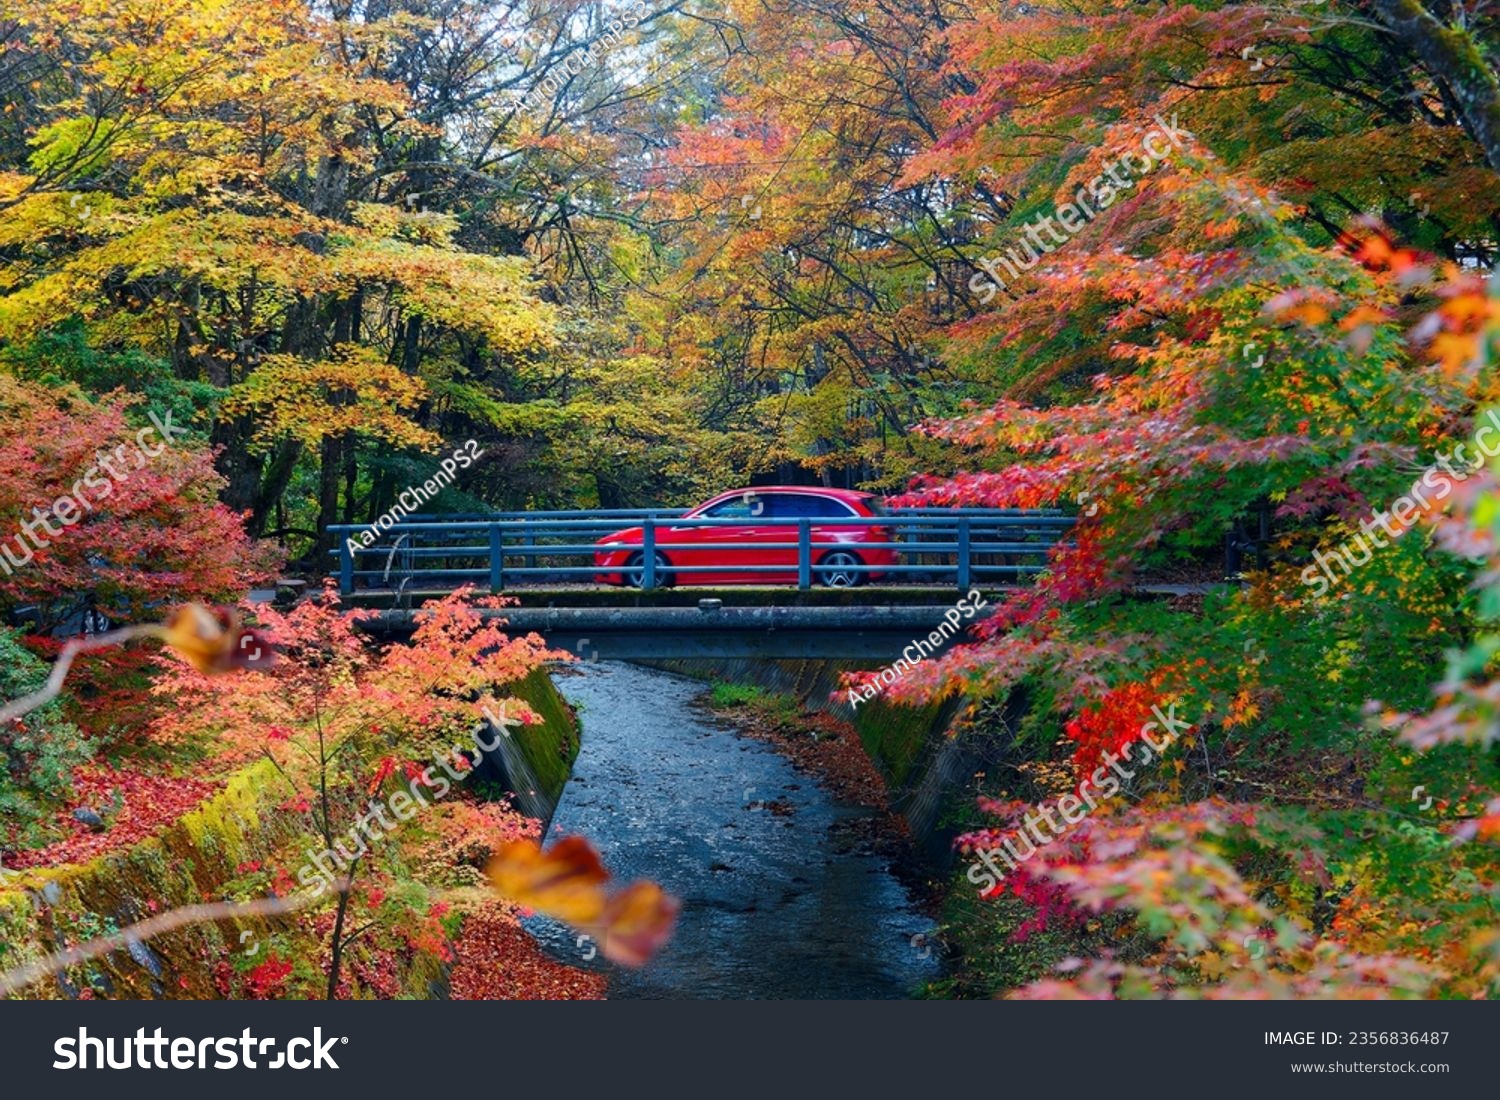 Autumn scenery of a red car driving thru a bridge over a stream in the forest with beautiful fall colors on the riverside, in Karuizawa 軽井沢, which is a popular tourist destination in Nagano, Japan #2356836487